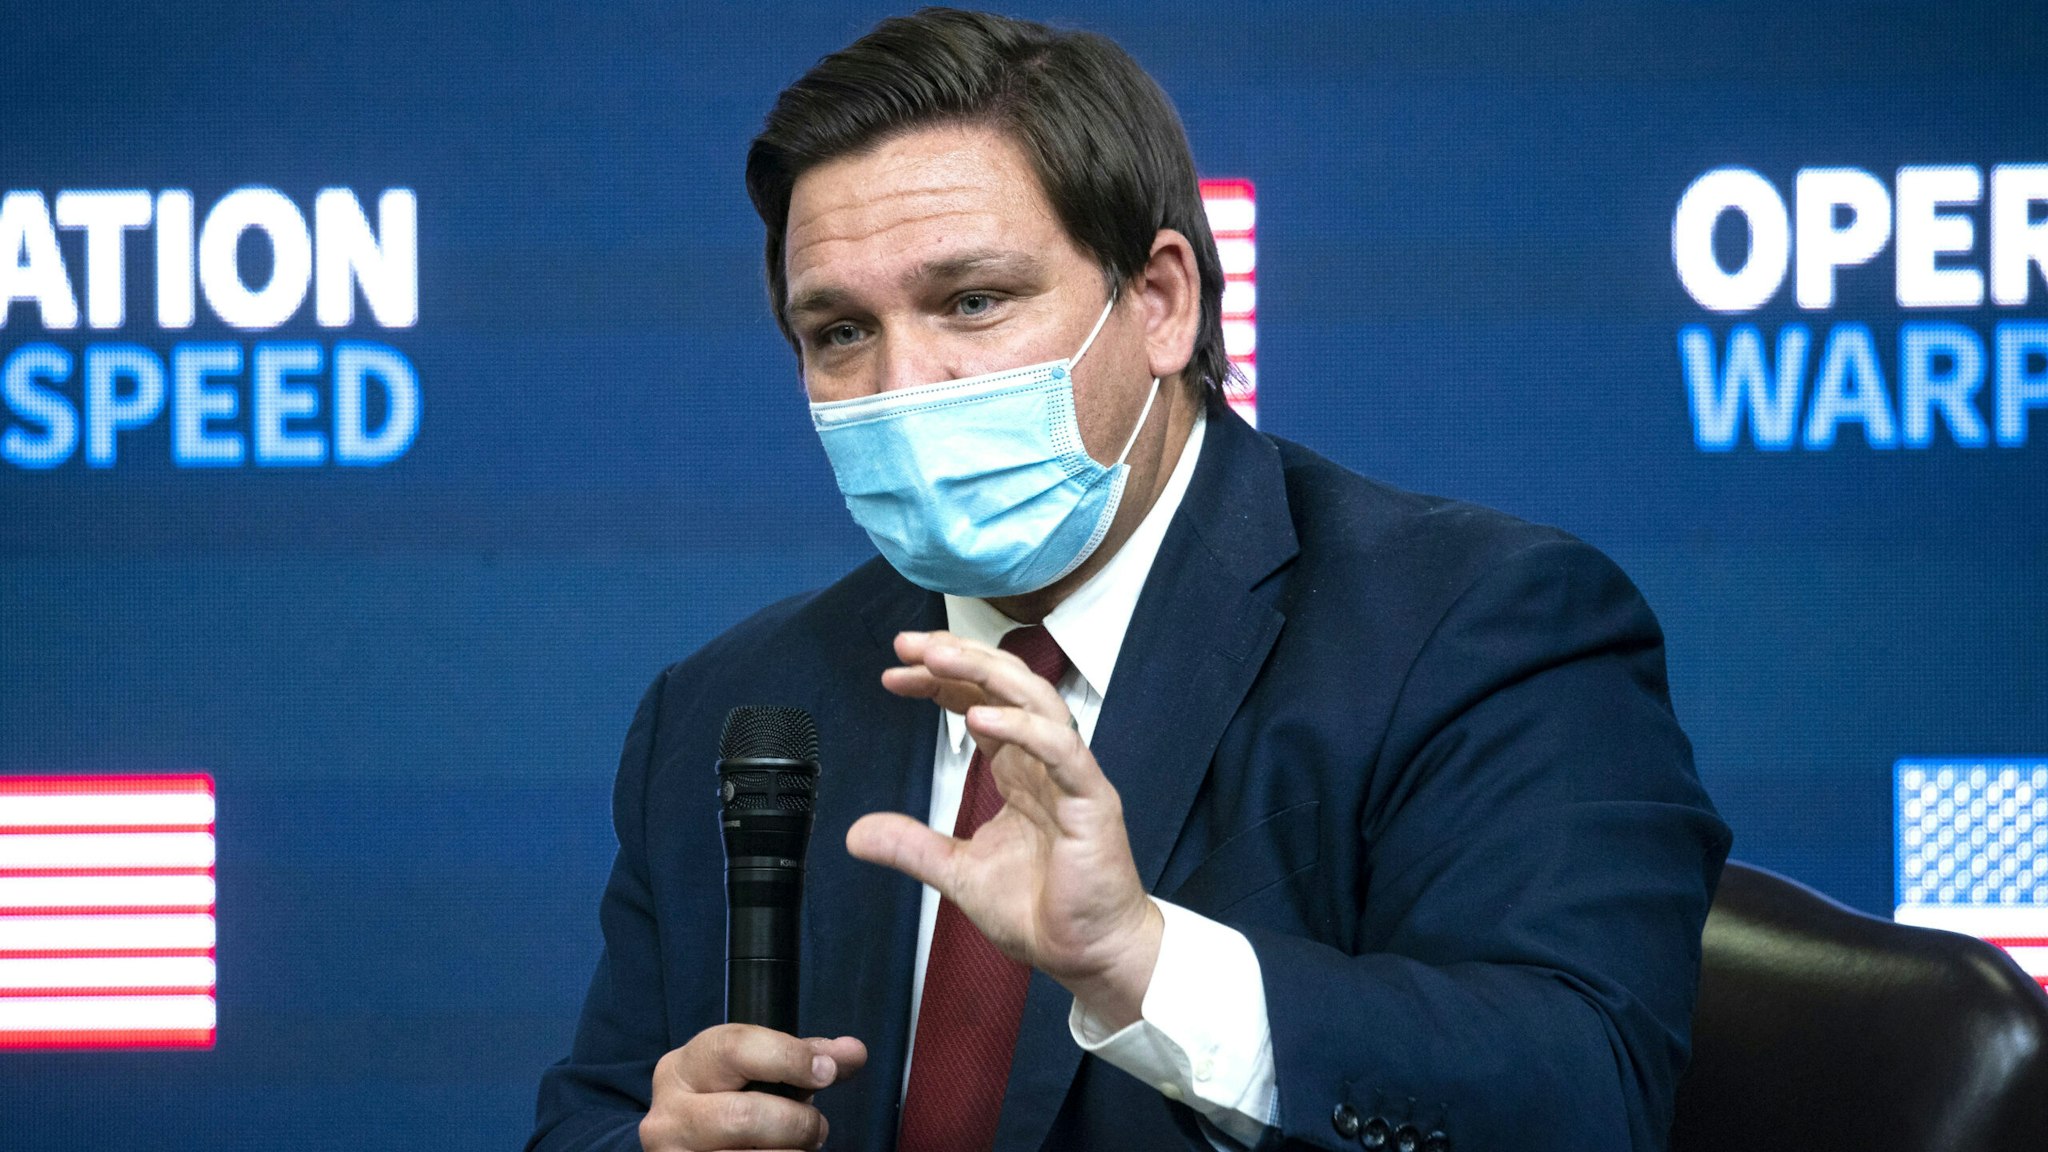 Ron DeSantis, governor of Florida, speaks during an Operation Warp Speed vaccine summit at the White House in Washington, D.C., U.S., on Tuesday, Dec. 8, 2020. President Trump celebrated the development of coronavirus vaccines at a White House summit on Tuesday and vowed to use executive powers if necessary to acquire sufficient doses, as the number of U.S. cases surpassed 15 million.